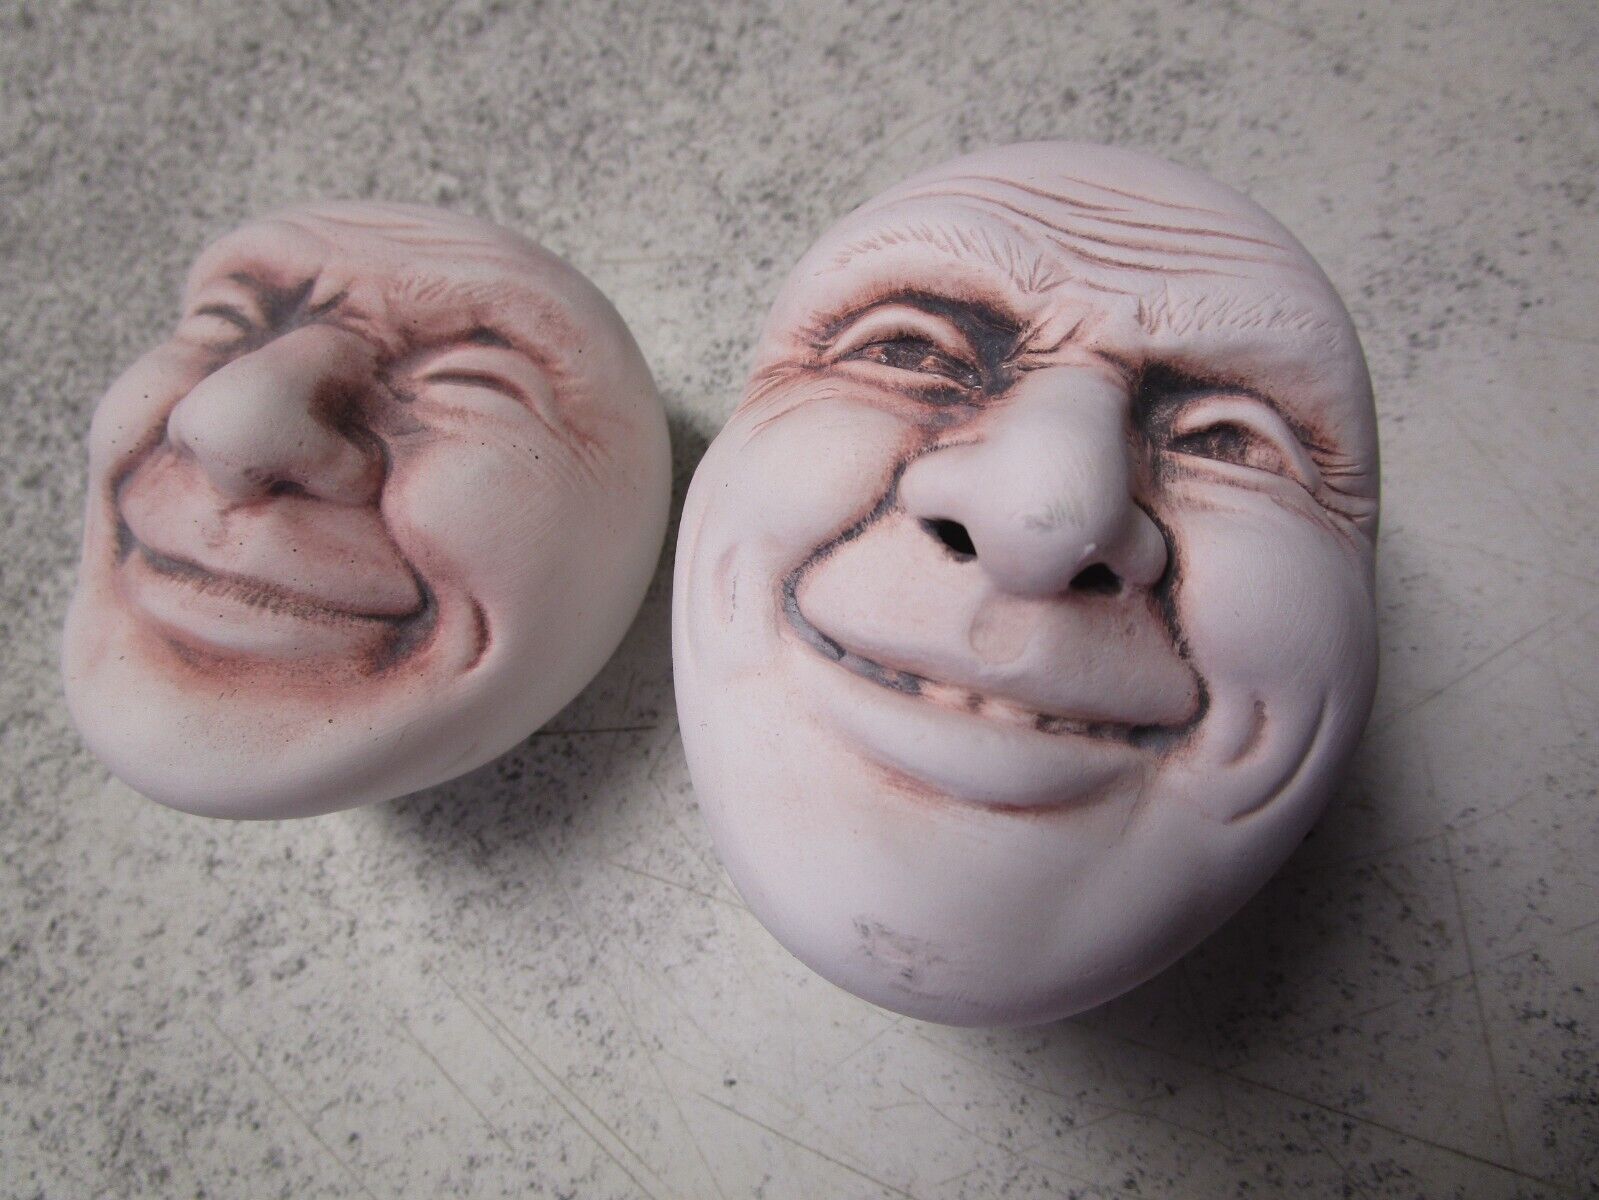 VTG 90s NOS Creepy Faces Head scary Salt & Pepper shakers pottery clay craft set